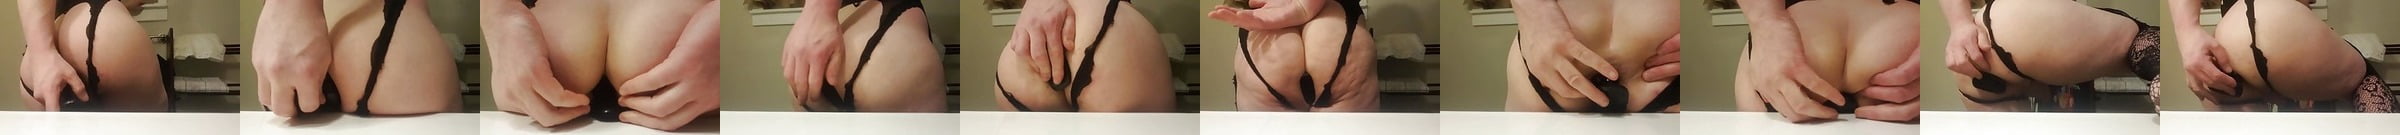 Sissy First Time Anal Shemale Porn Videos XHamster